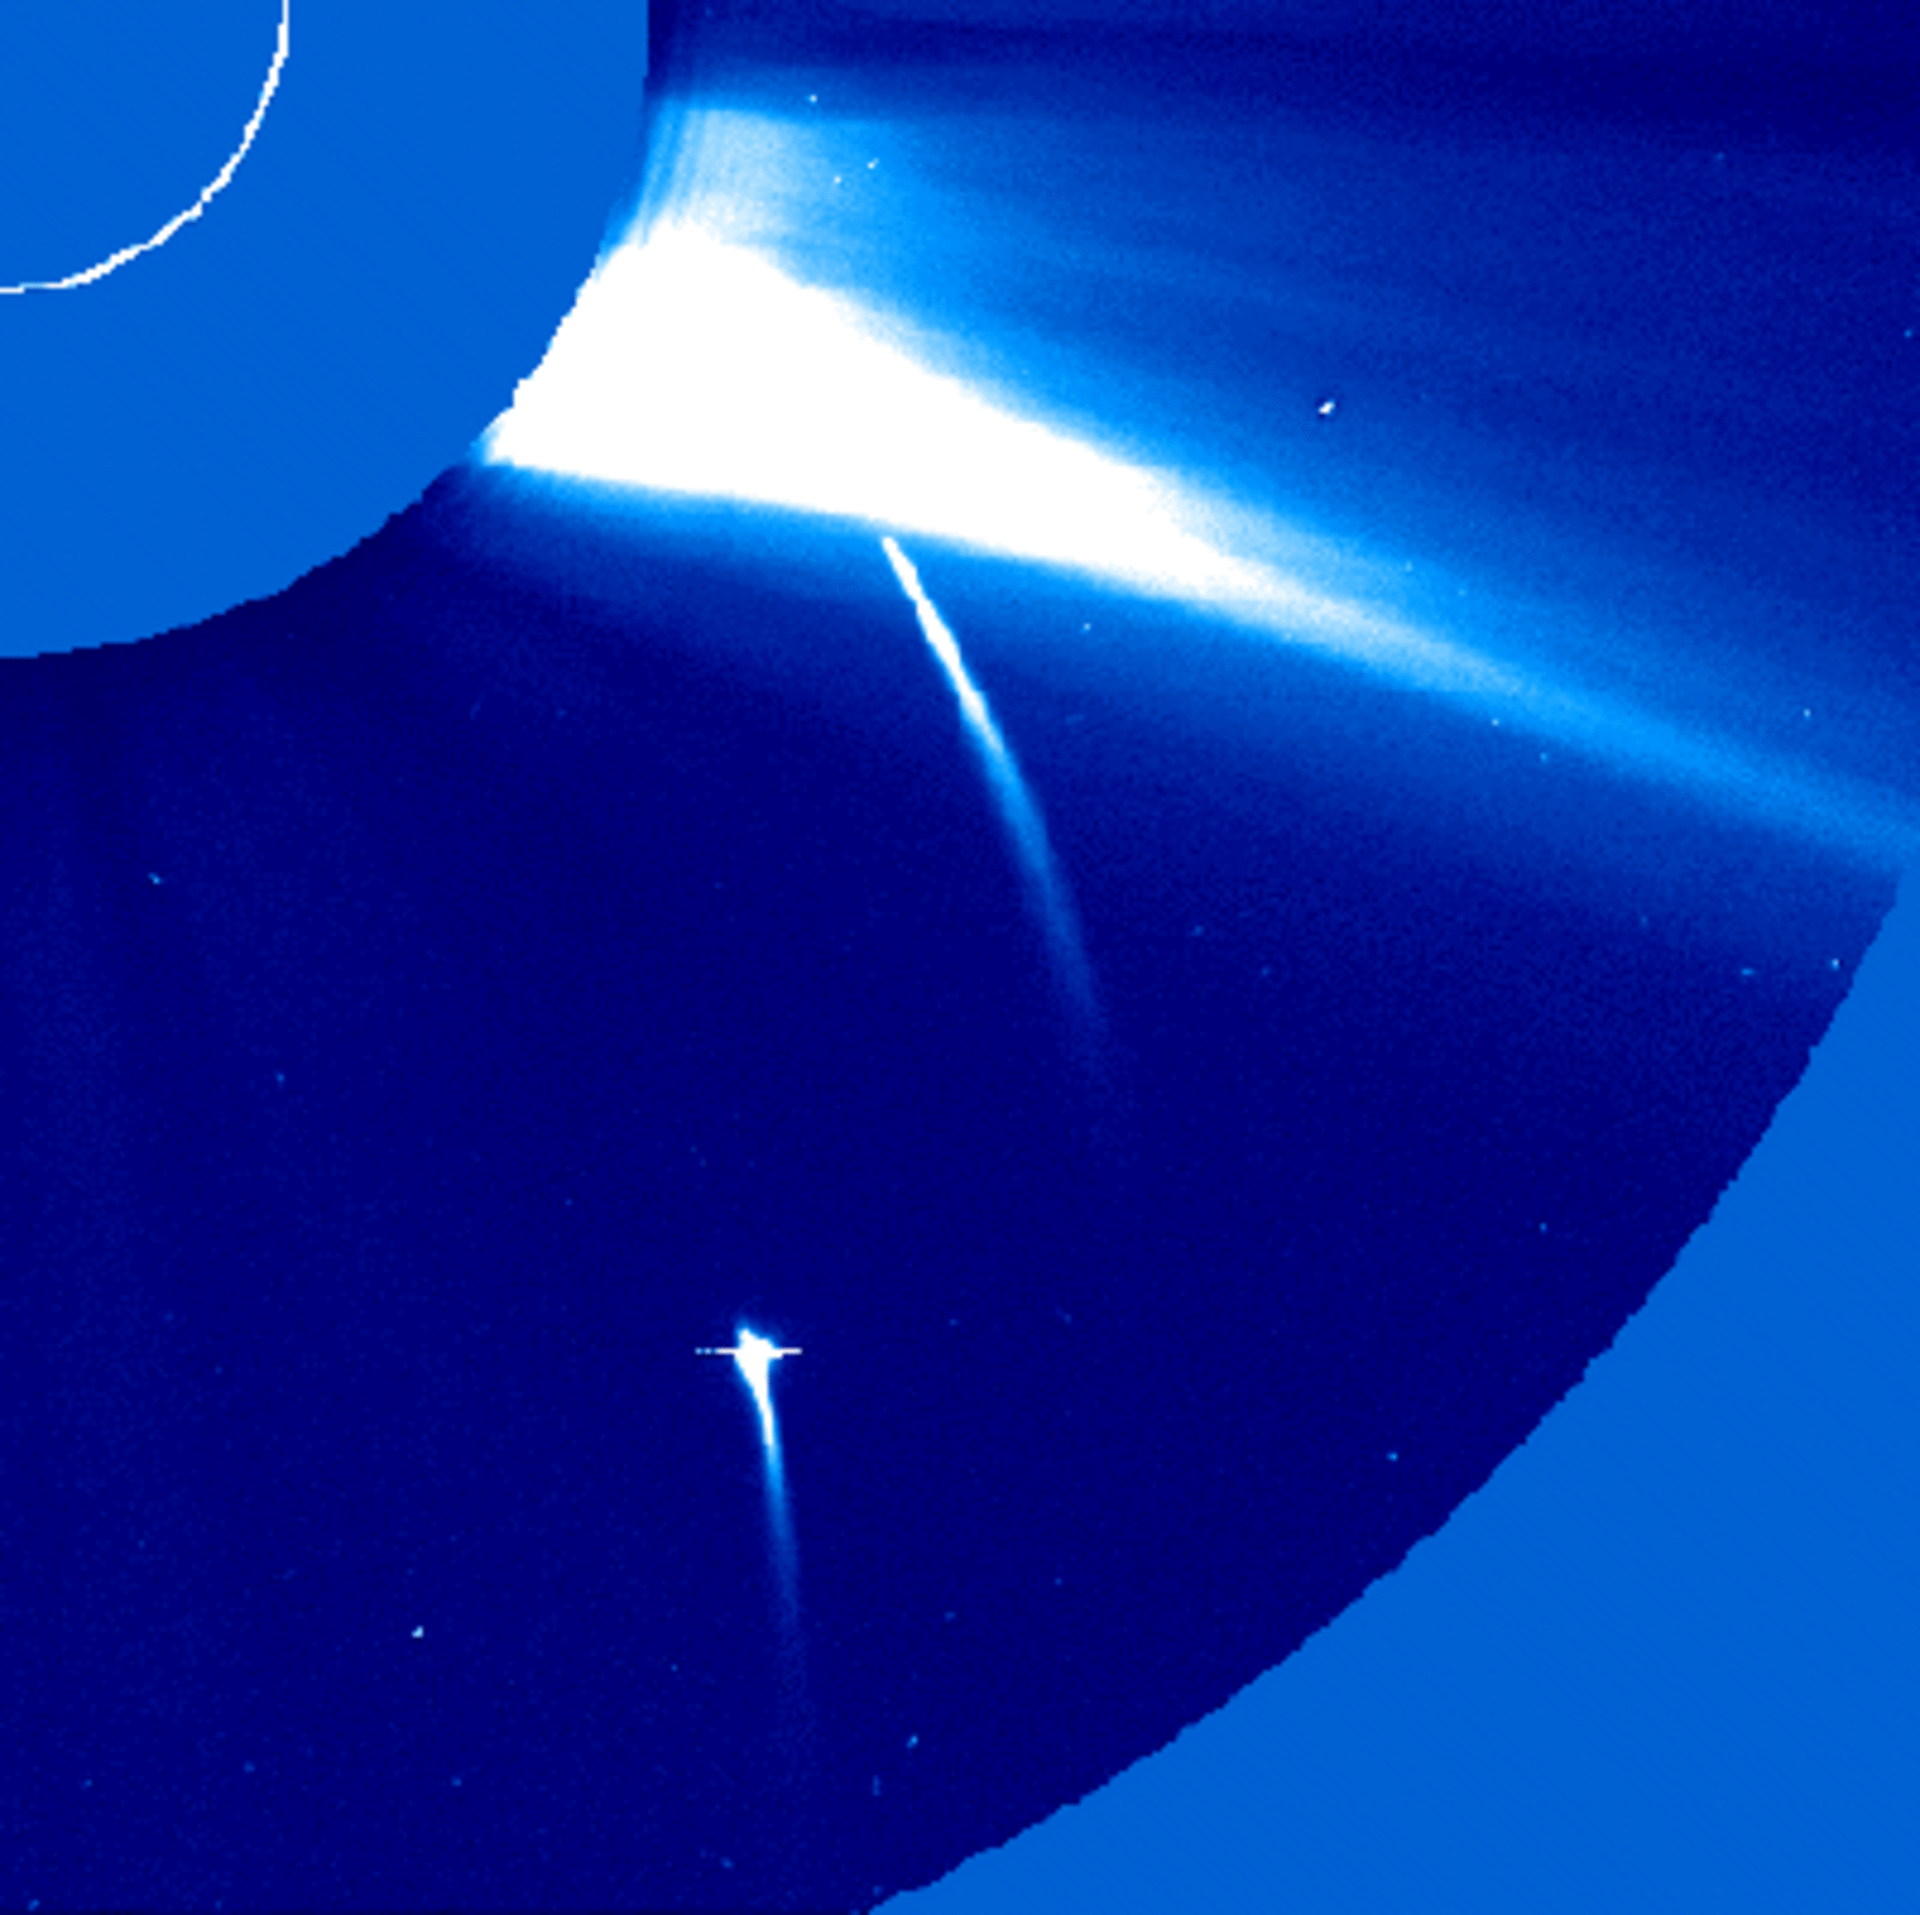 SOHO sees two comets plunge into the Sun